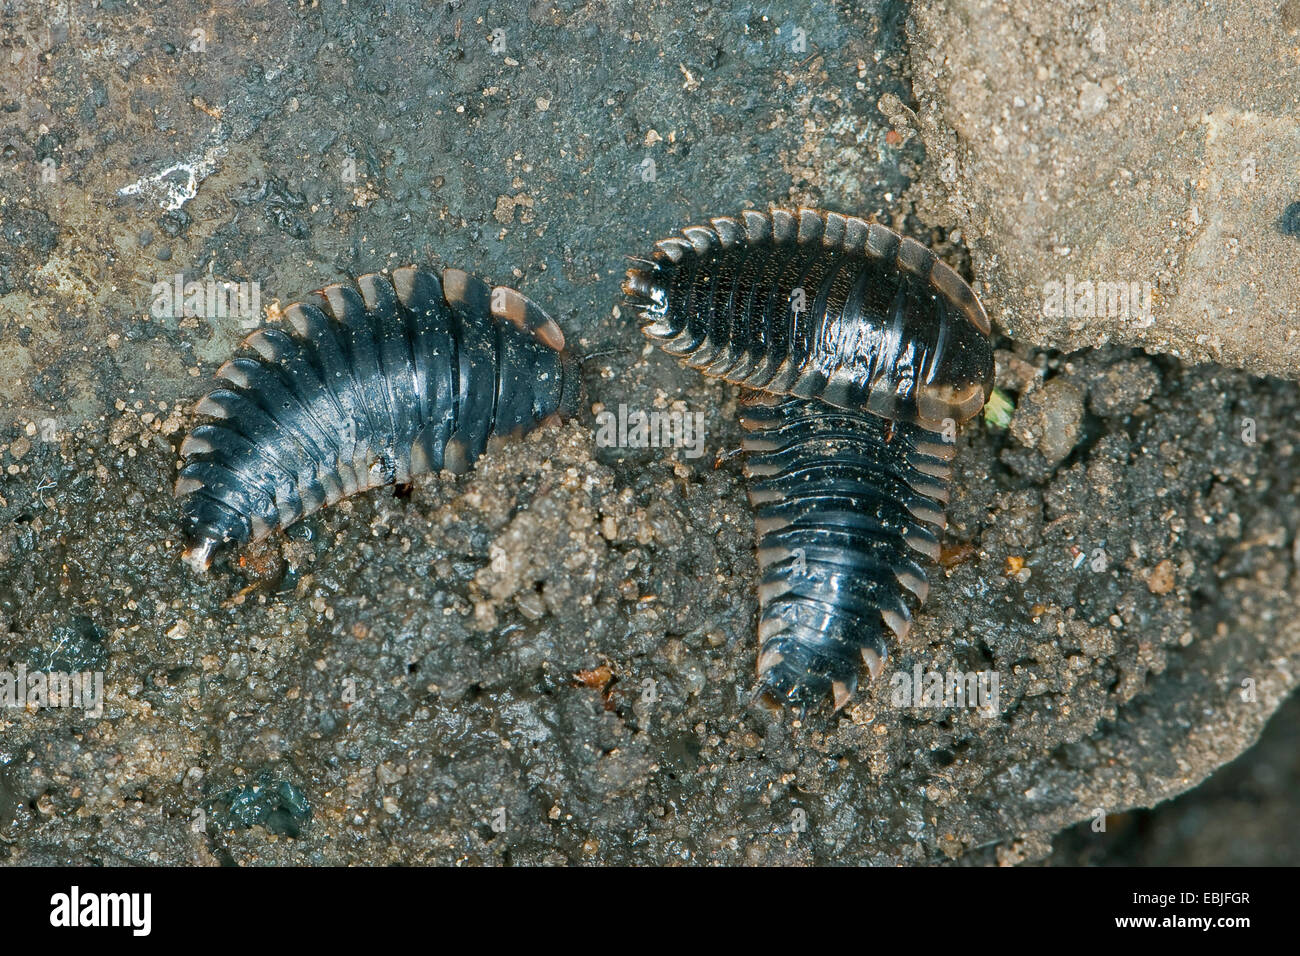 Rothalsige-Silphe-Larve (Oiceoptoma thoracica, Oiceoptoma thoracicum, Oeceoptoma thoracicum), larvae, Germany Stock Photo